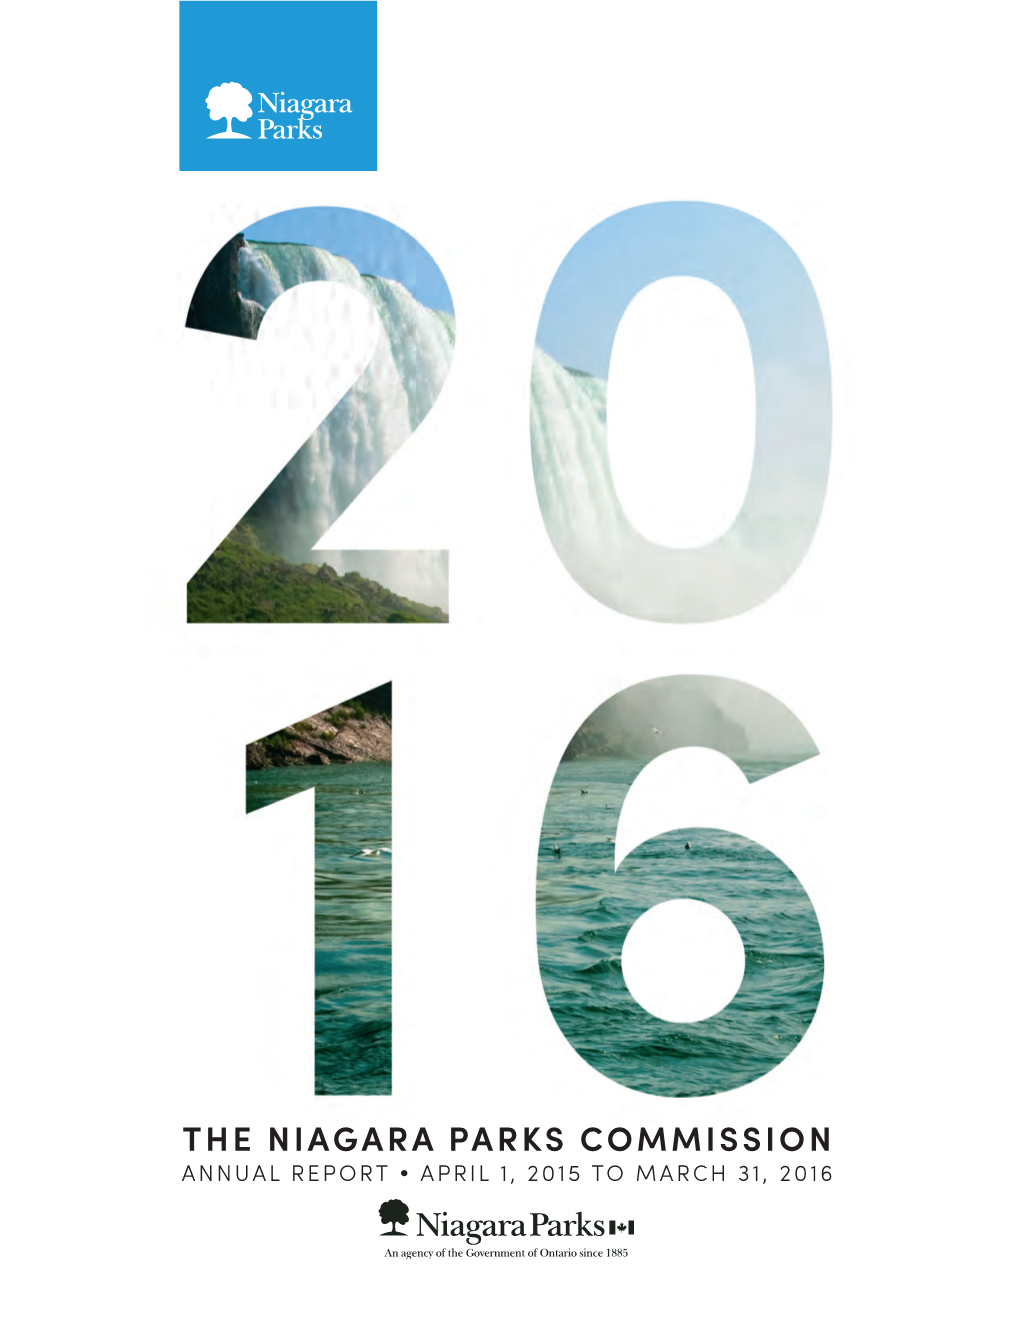 THE NIAGARA PARKS COMMISSION ANNUAL REPORT • APRIL 1, 2015 to MARCH 31, 2016 Niagara Parks Annual Report / April 1, 2015 to March 31, 2016